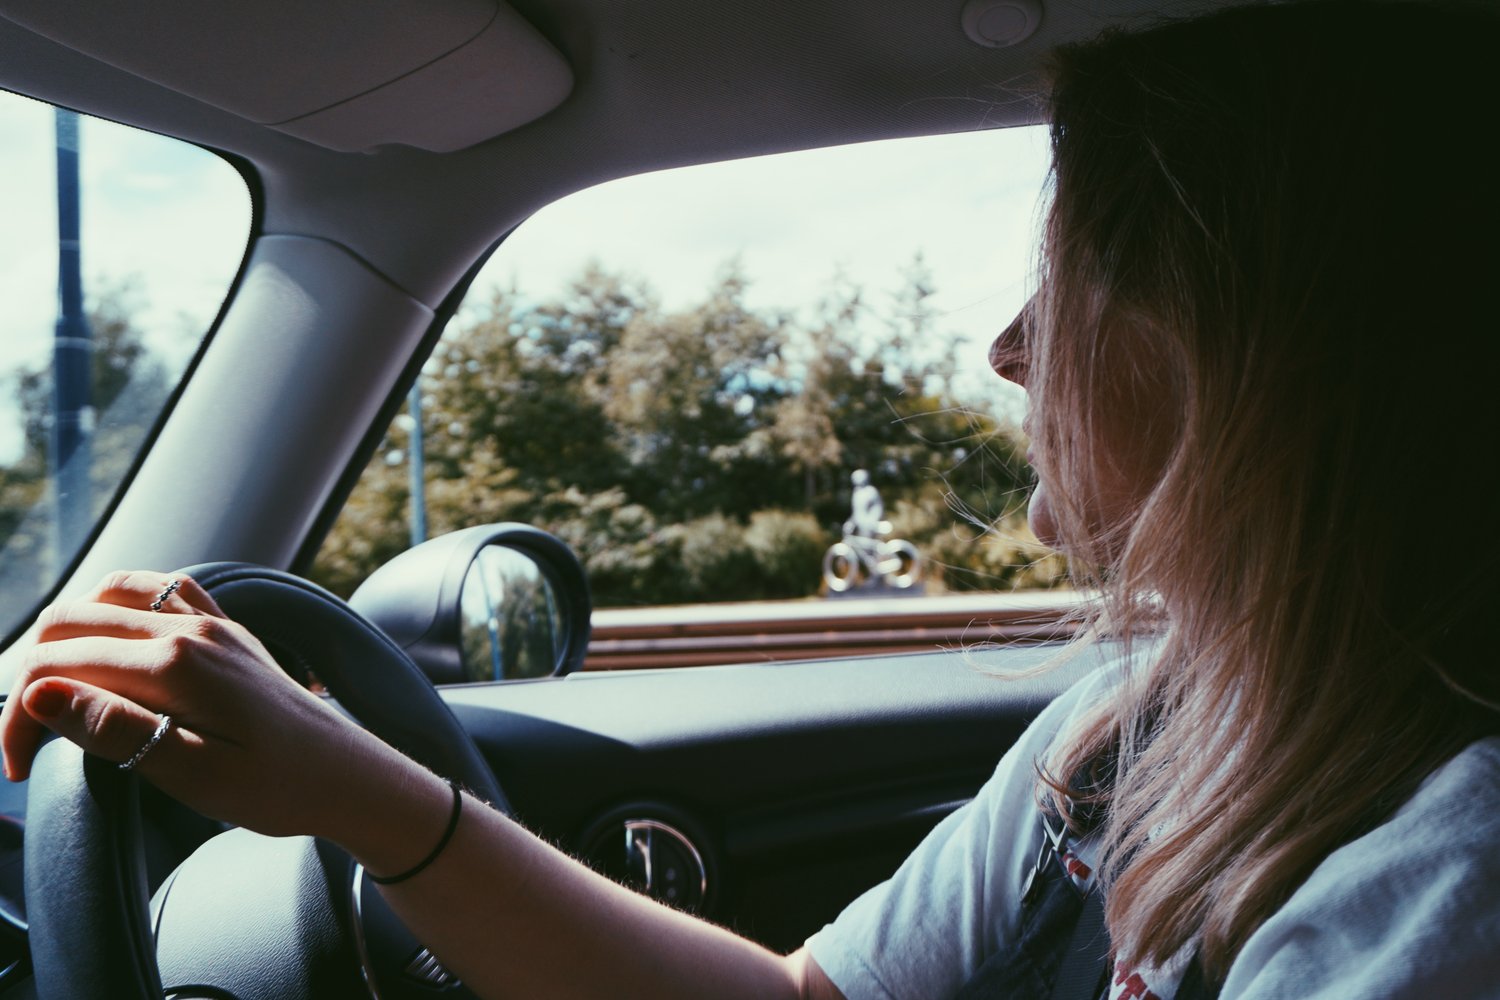 Female drivers on vision issues – what can we learn?